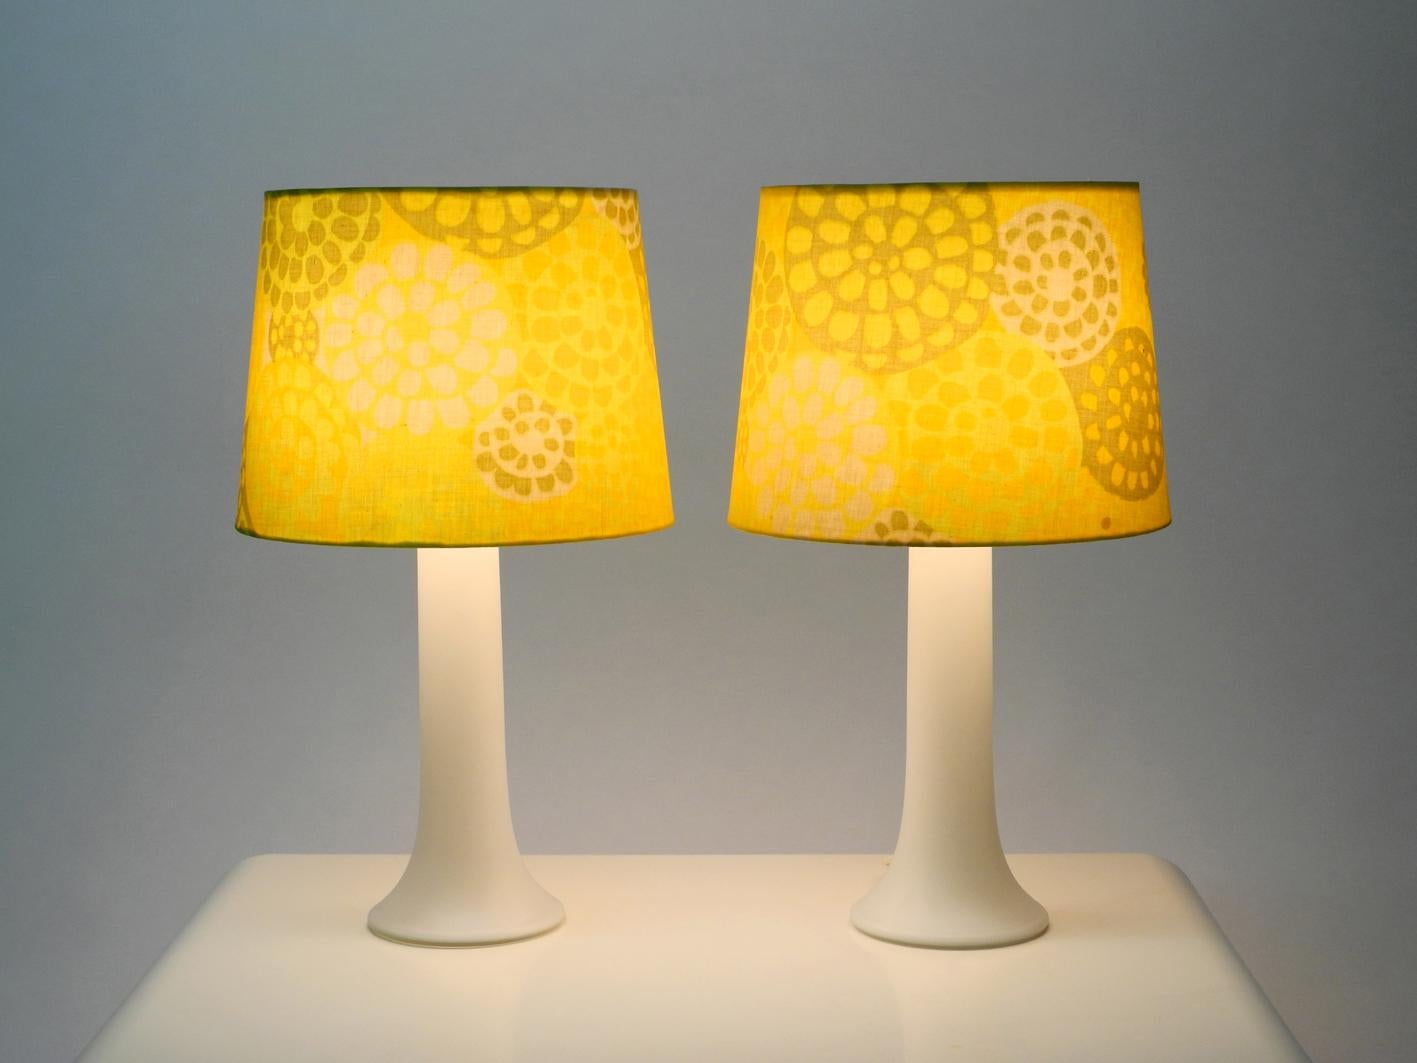 Very rare pair of large 1960s glass table lamps with original Pop Art fabric lampshades by Luxus Vittsjö.
Made in Sweden. Beautiful high quality Scandinavian design. With original label. Long feet are made of thick overlay glass. The tops are made